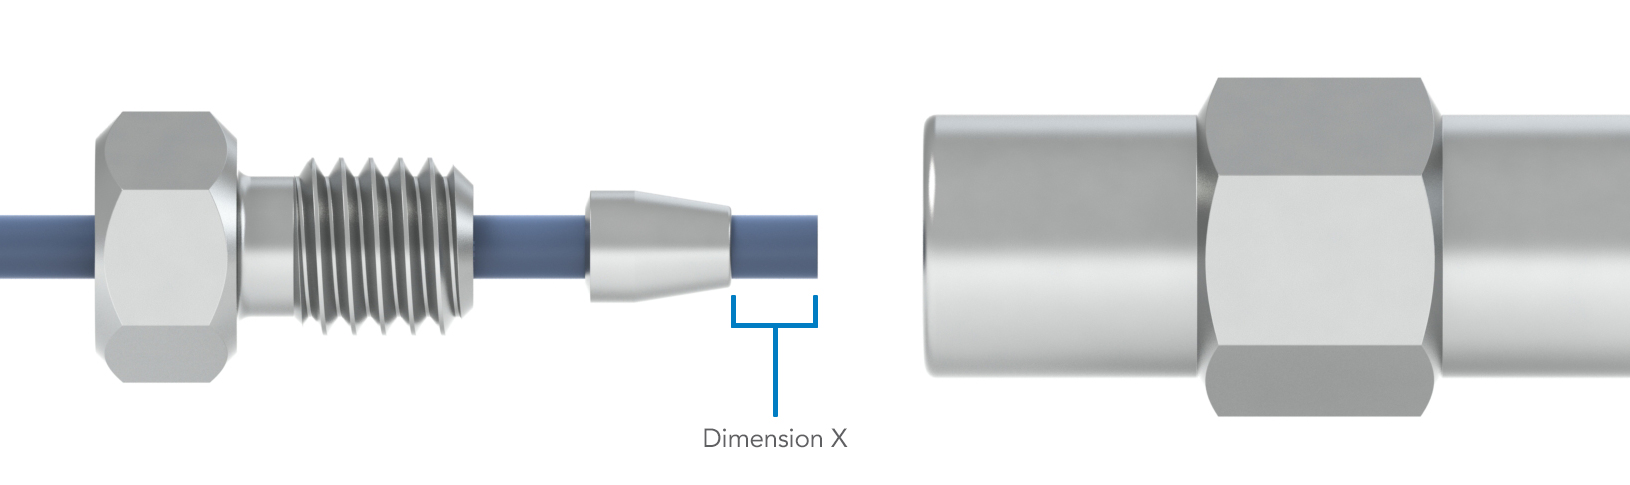 measure the distance from the end of the ferrule to the end of the tubing, dimension X, to understand the installation process